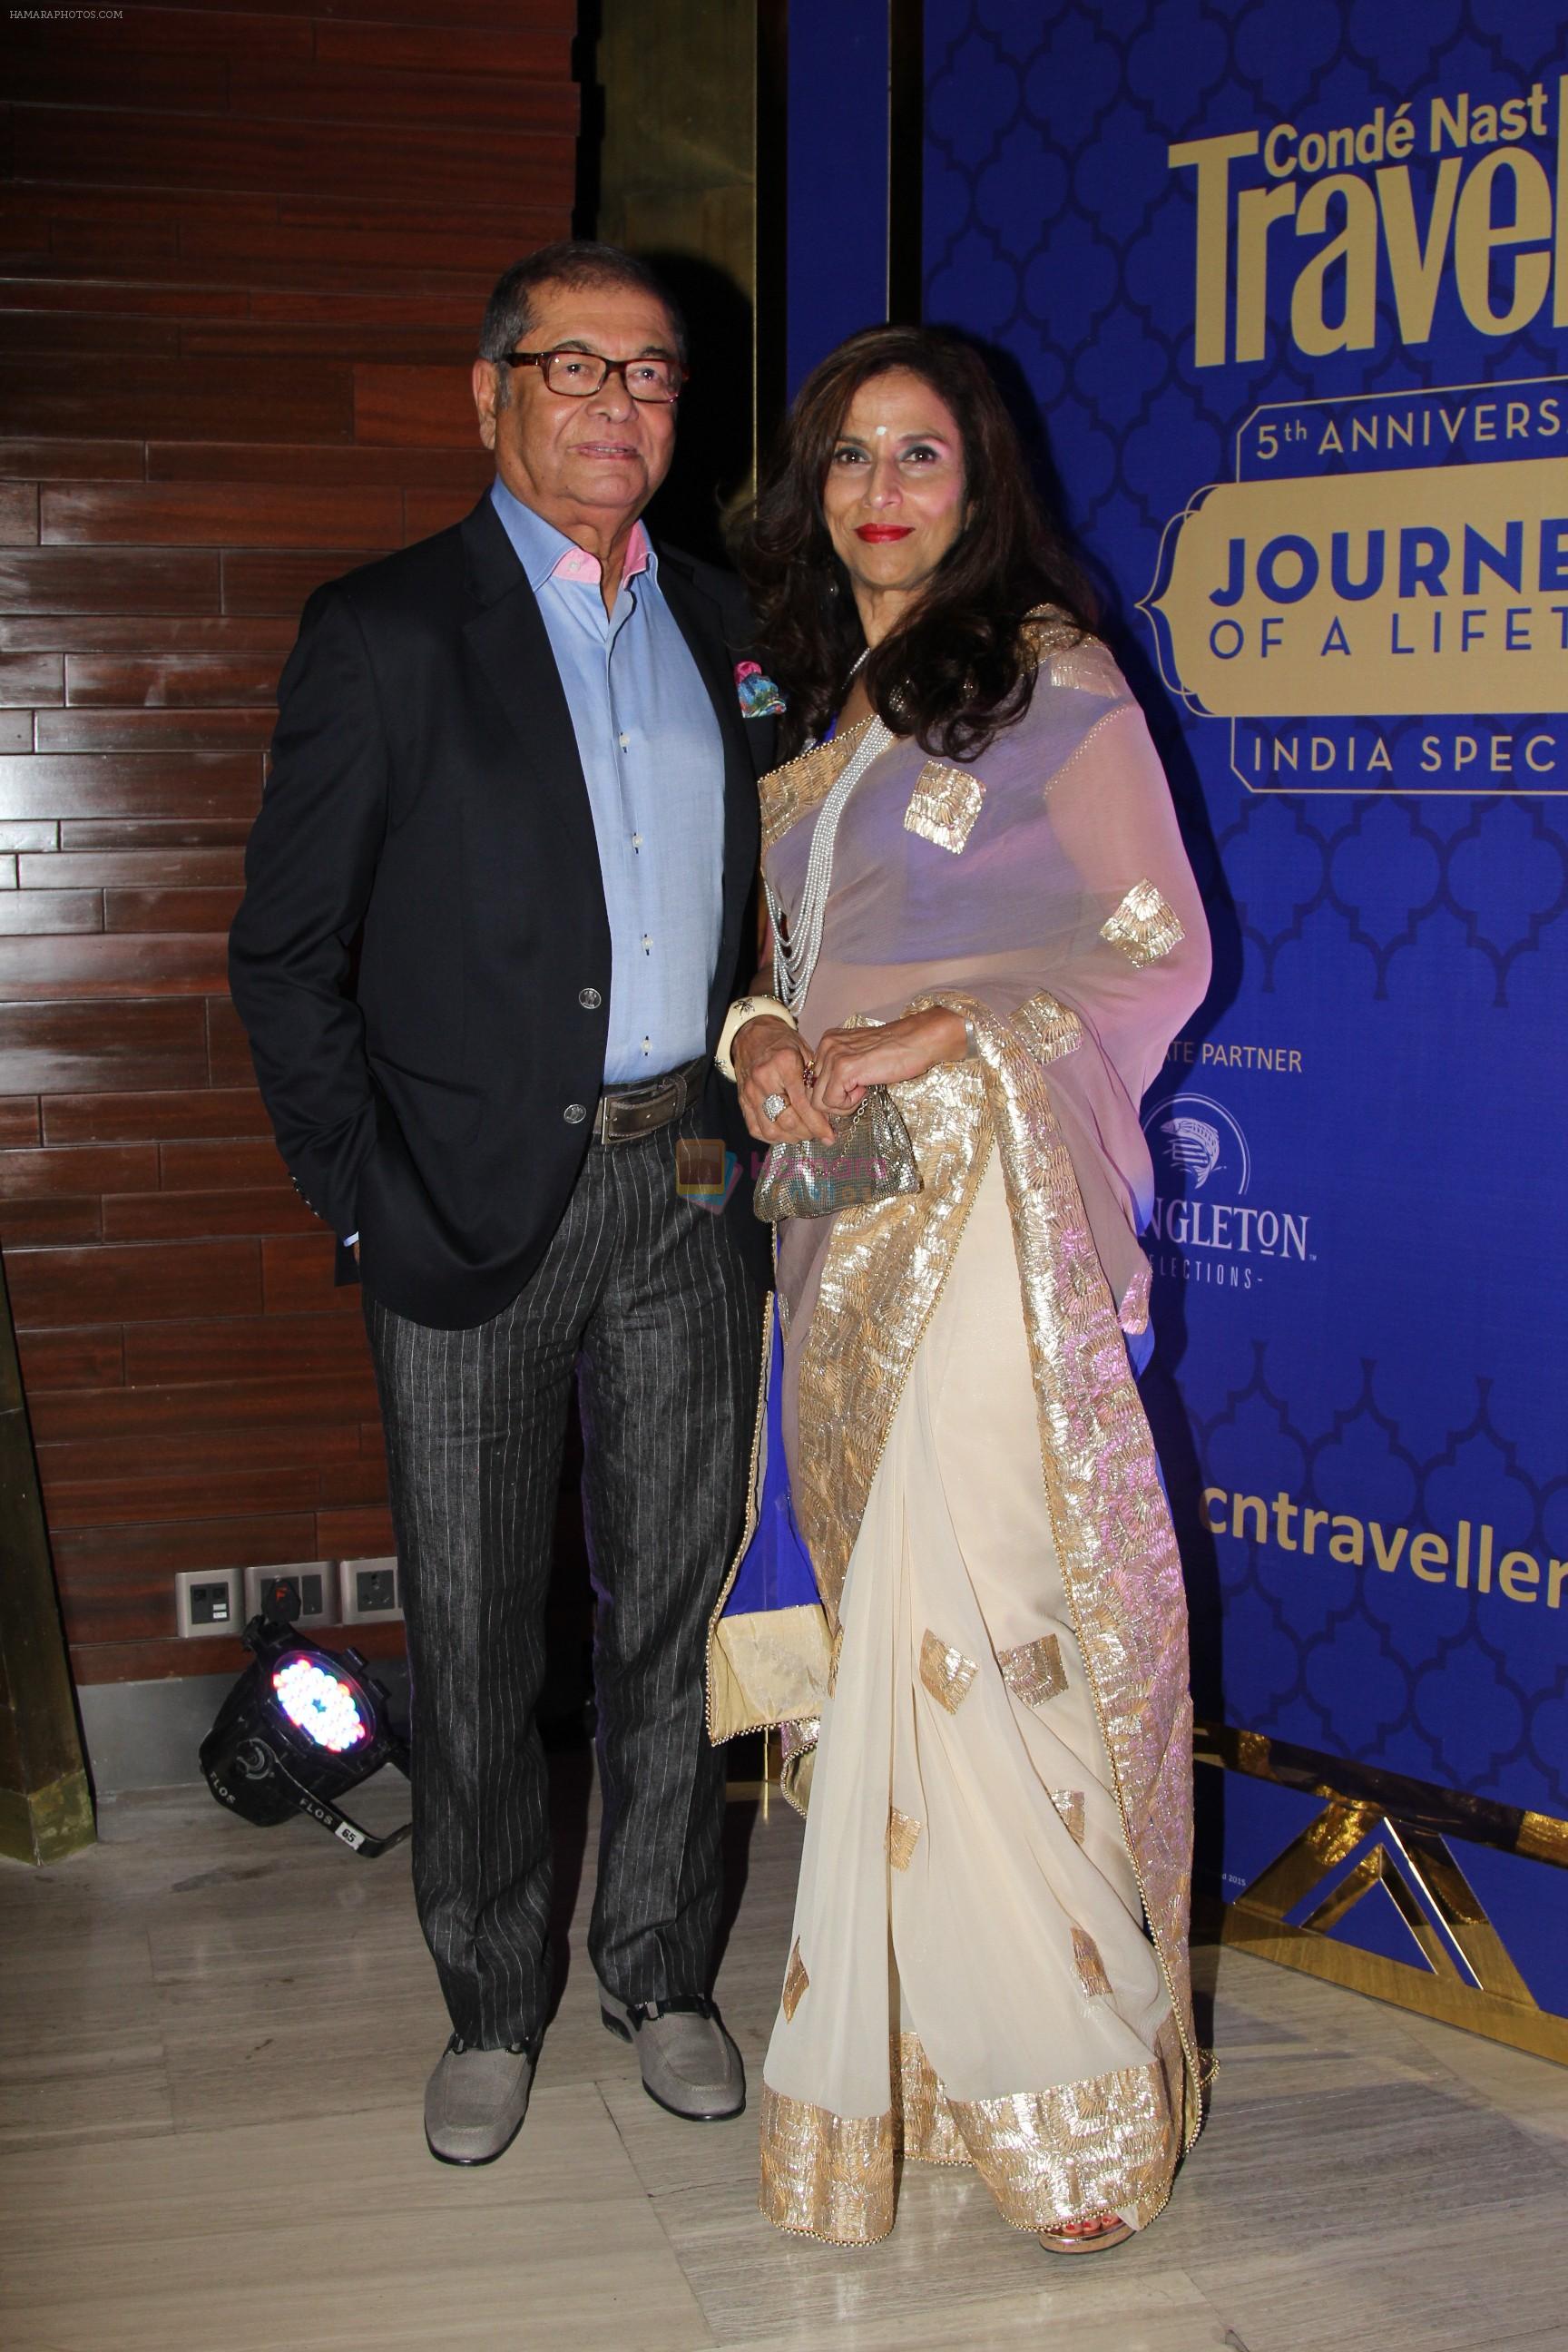 Shobhaa De with husband Dilip De at Conde Nast Traveller India's 5th anniversary celebrations with   _Journeys of a Lifetime_, St Regis, Mumbai